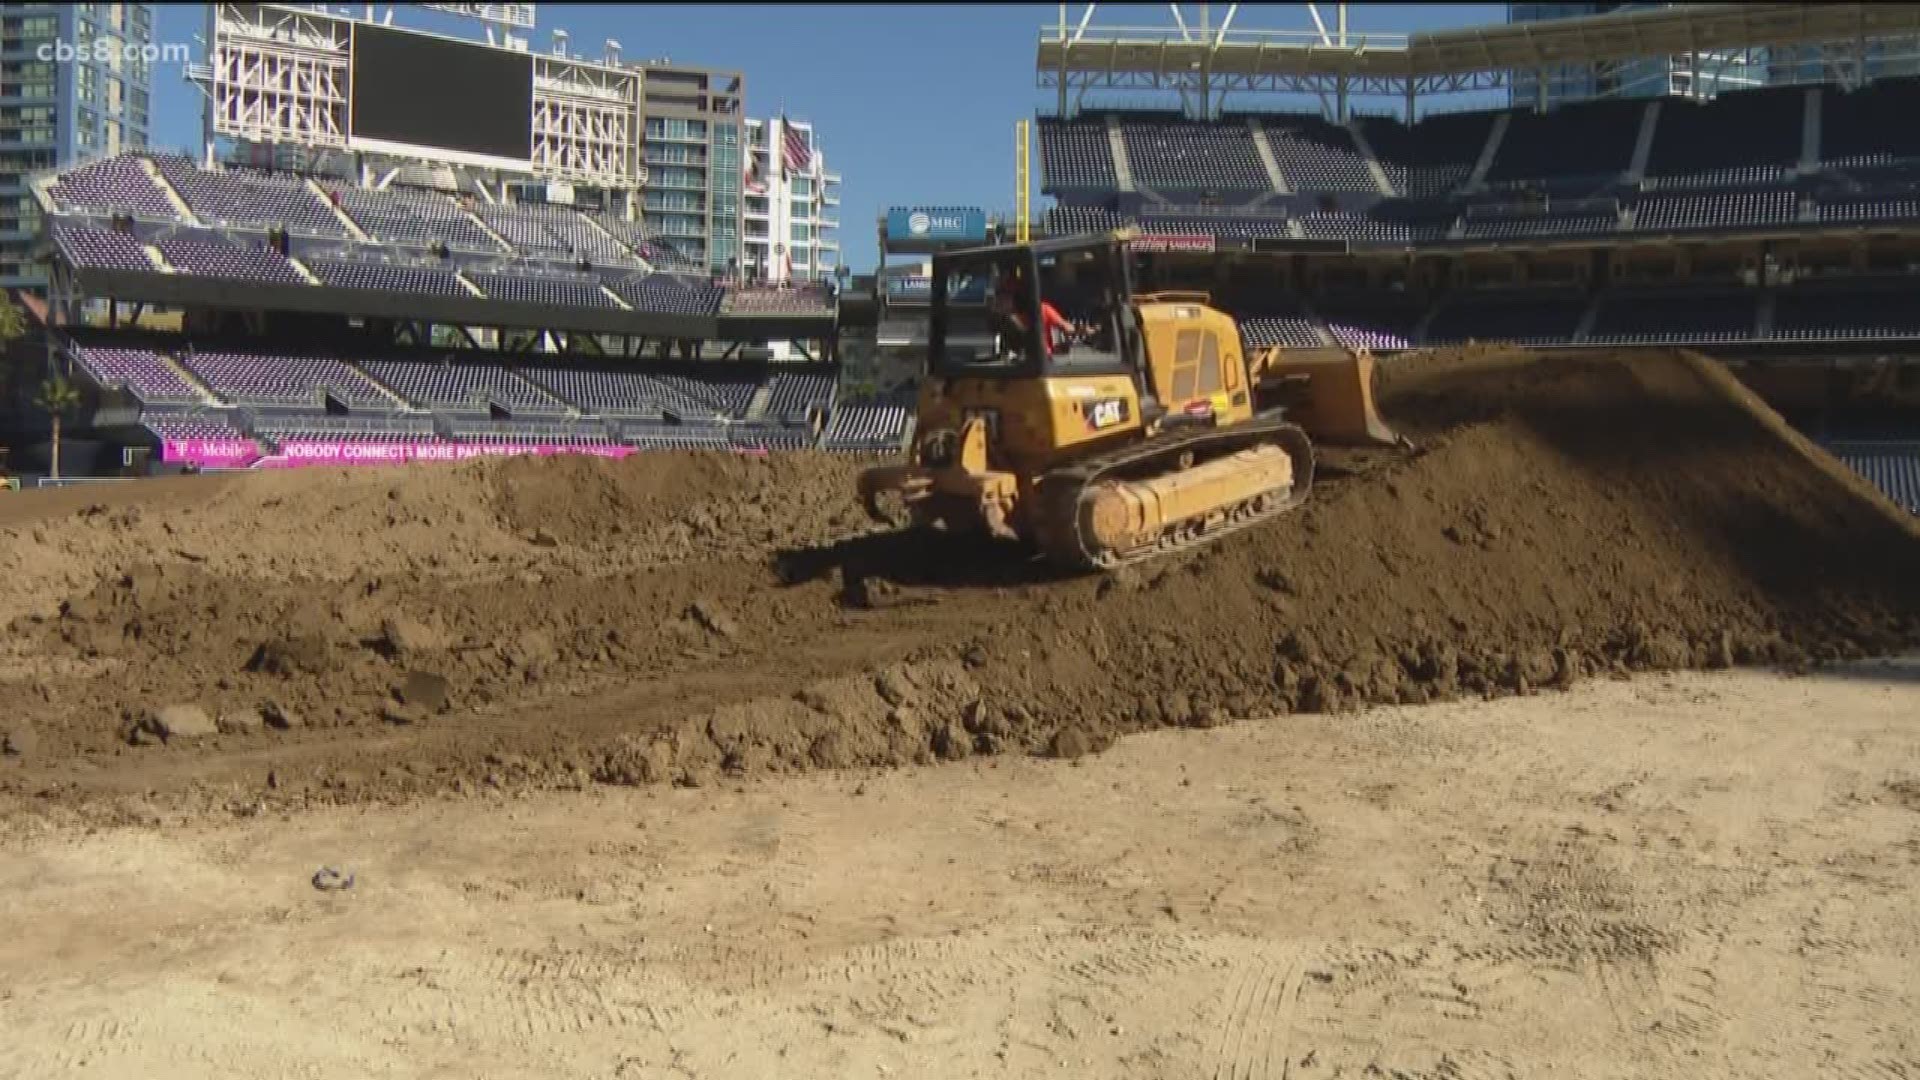 Monster Truck fans are gearing up for this year's Monster Jam & Supercross at Petco Park. News 8's Erik Swanson takes us inside for a special sneak preview.